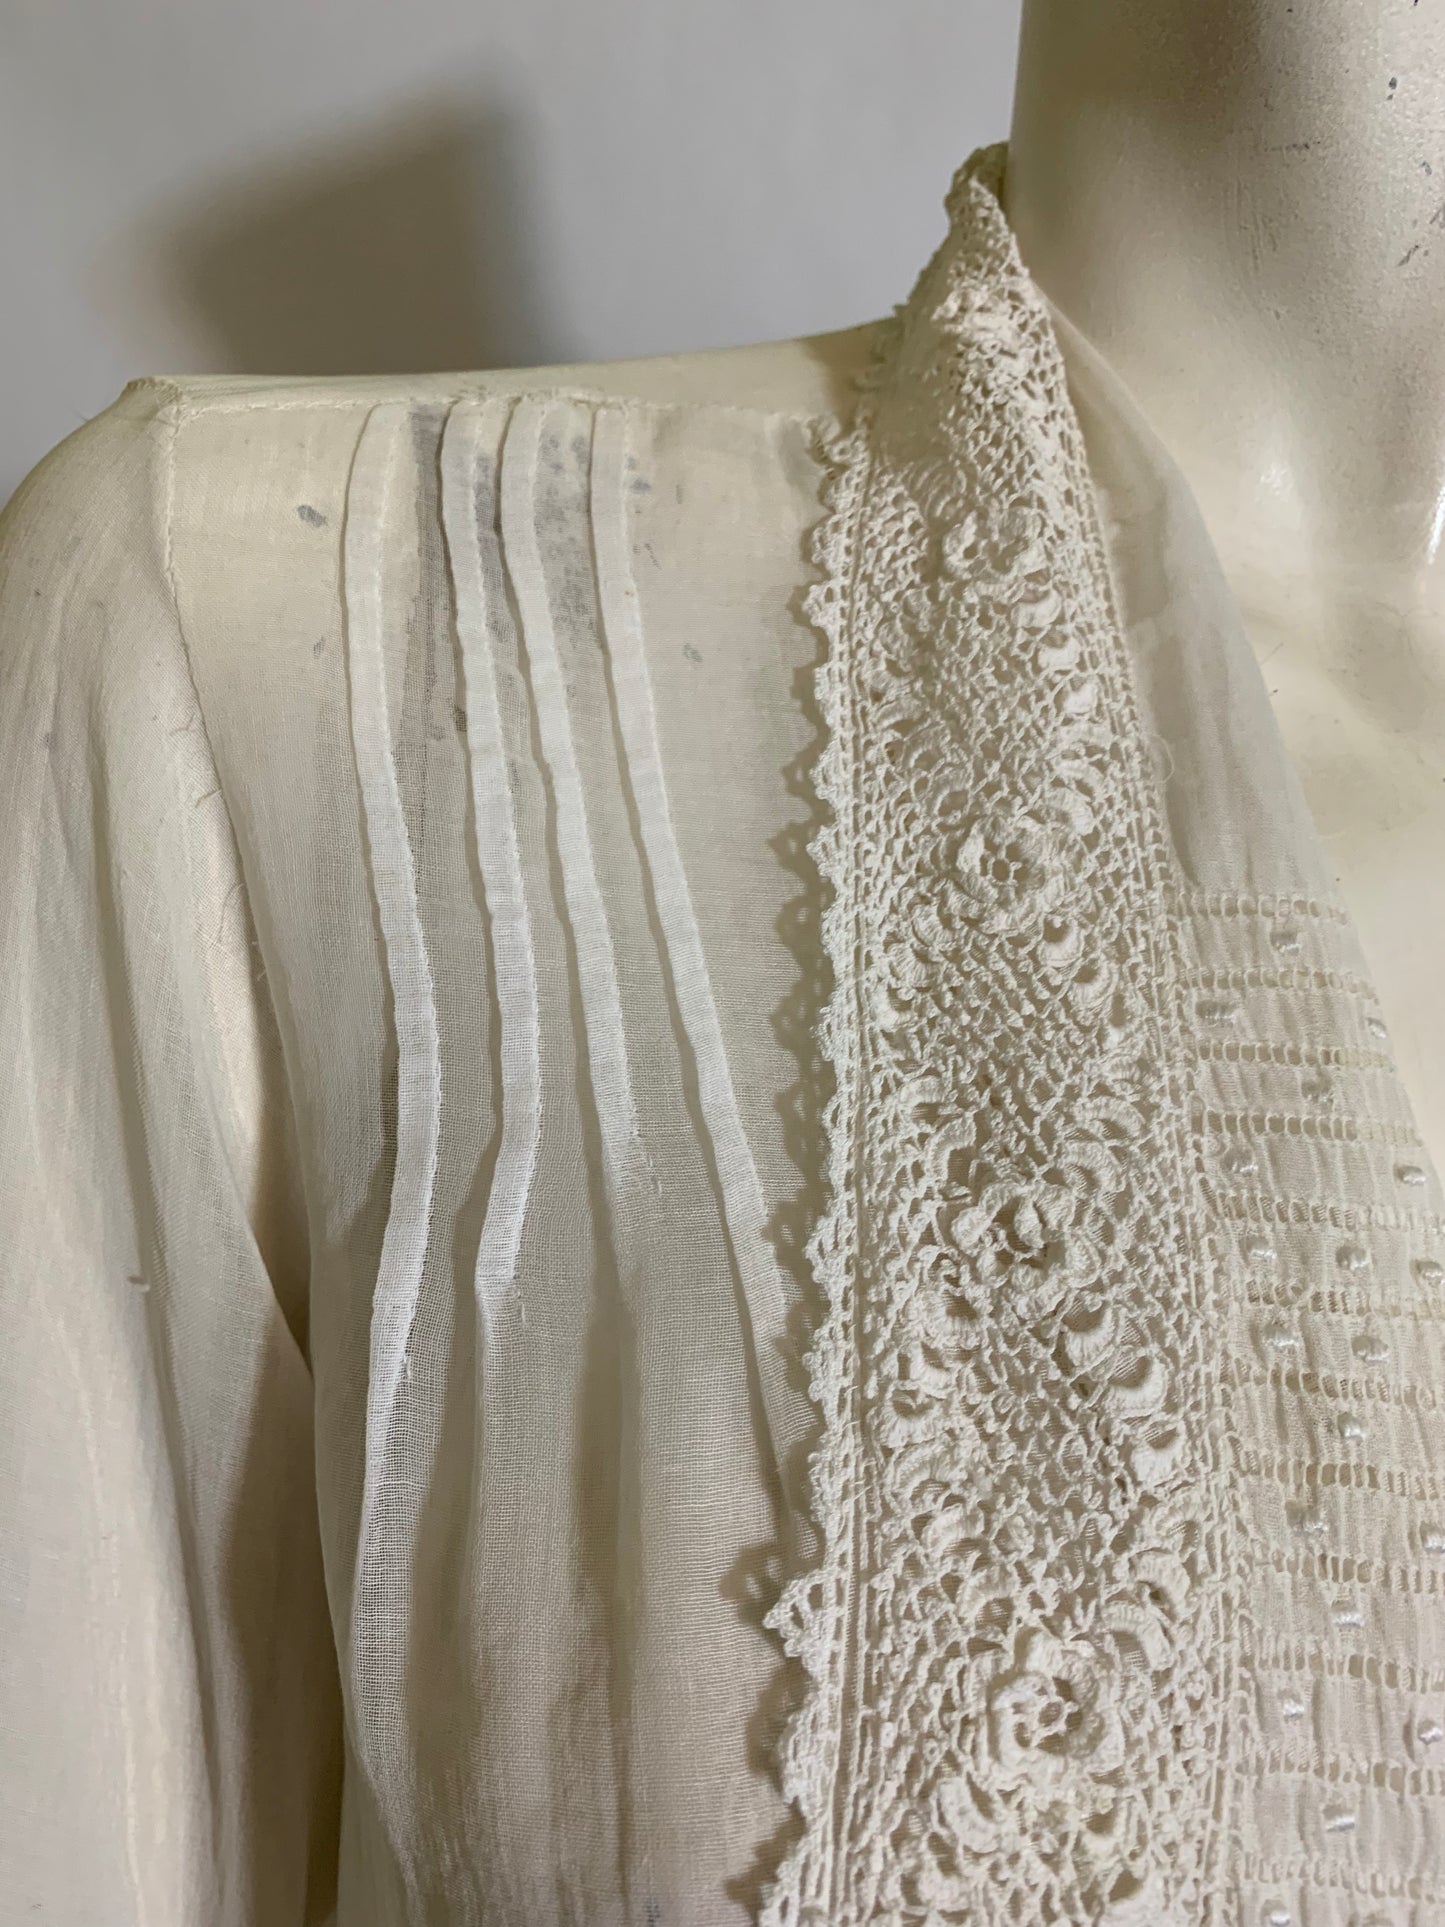 Long Sleeved White Lawn Cotton Blouse with Lace Collar and Embroidery circa 1910s